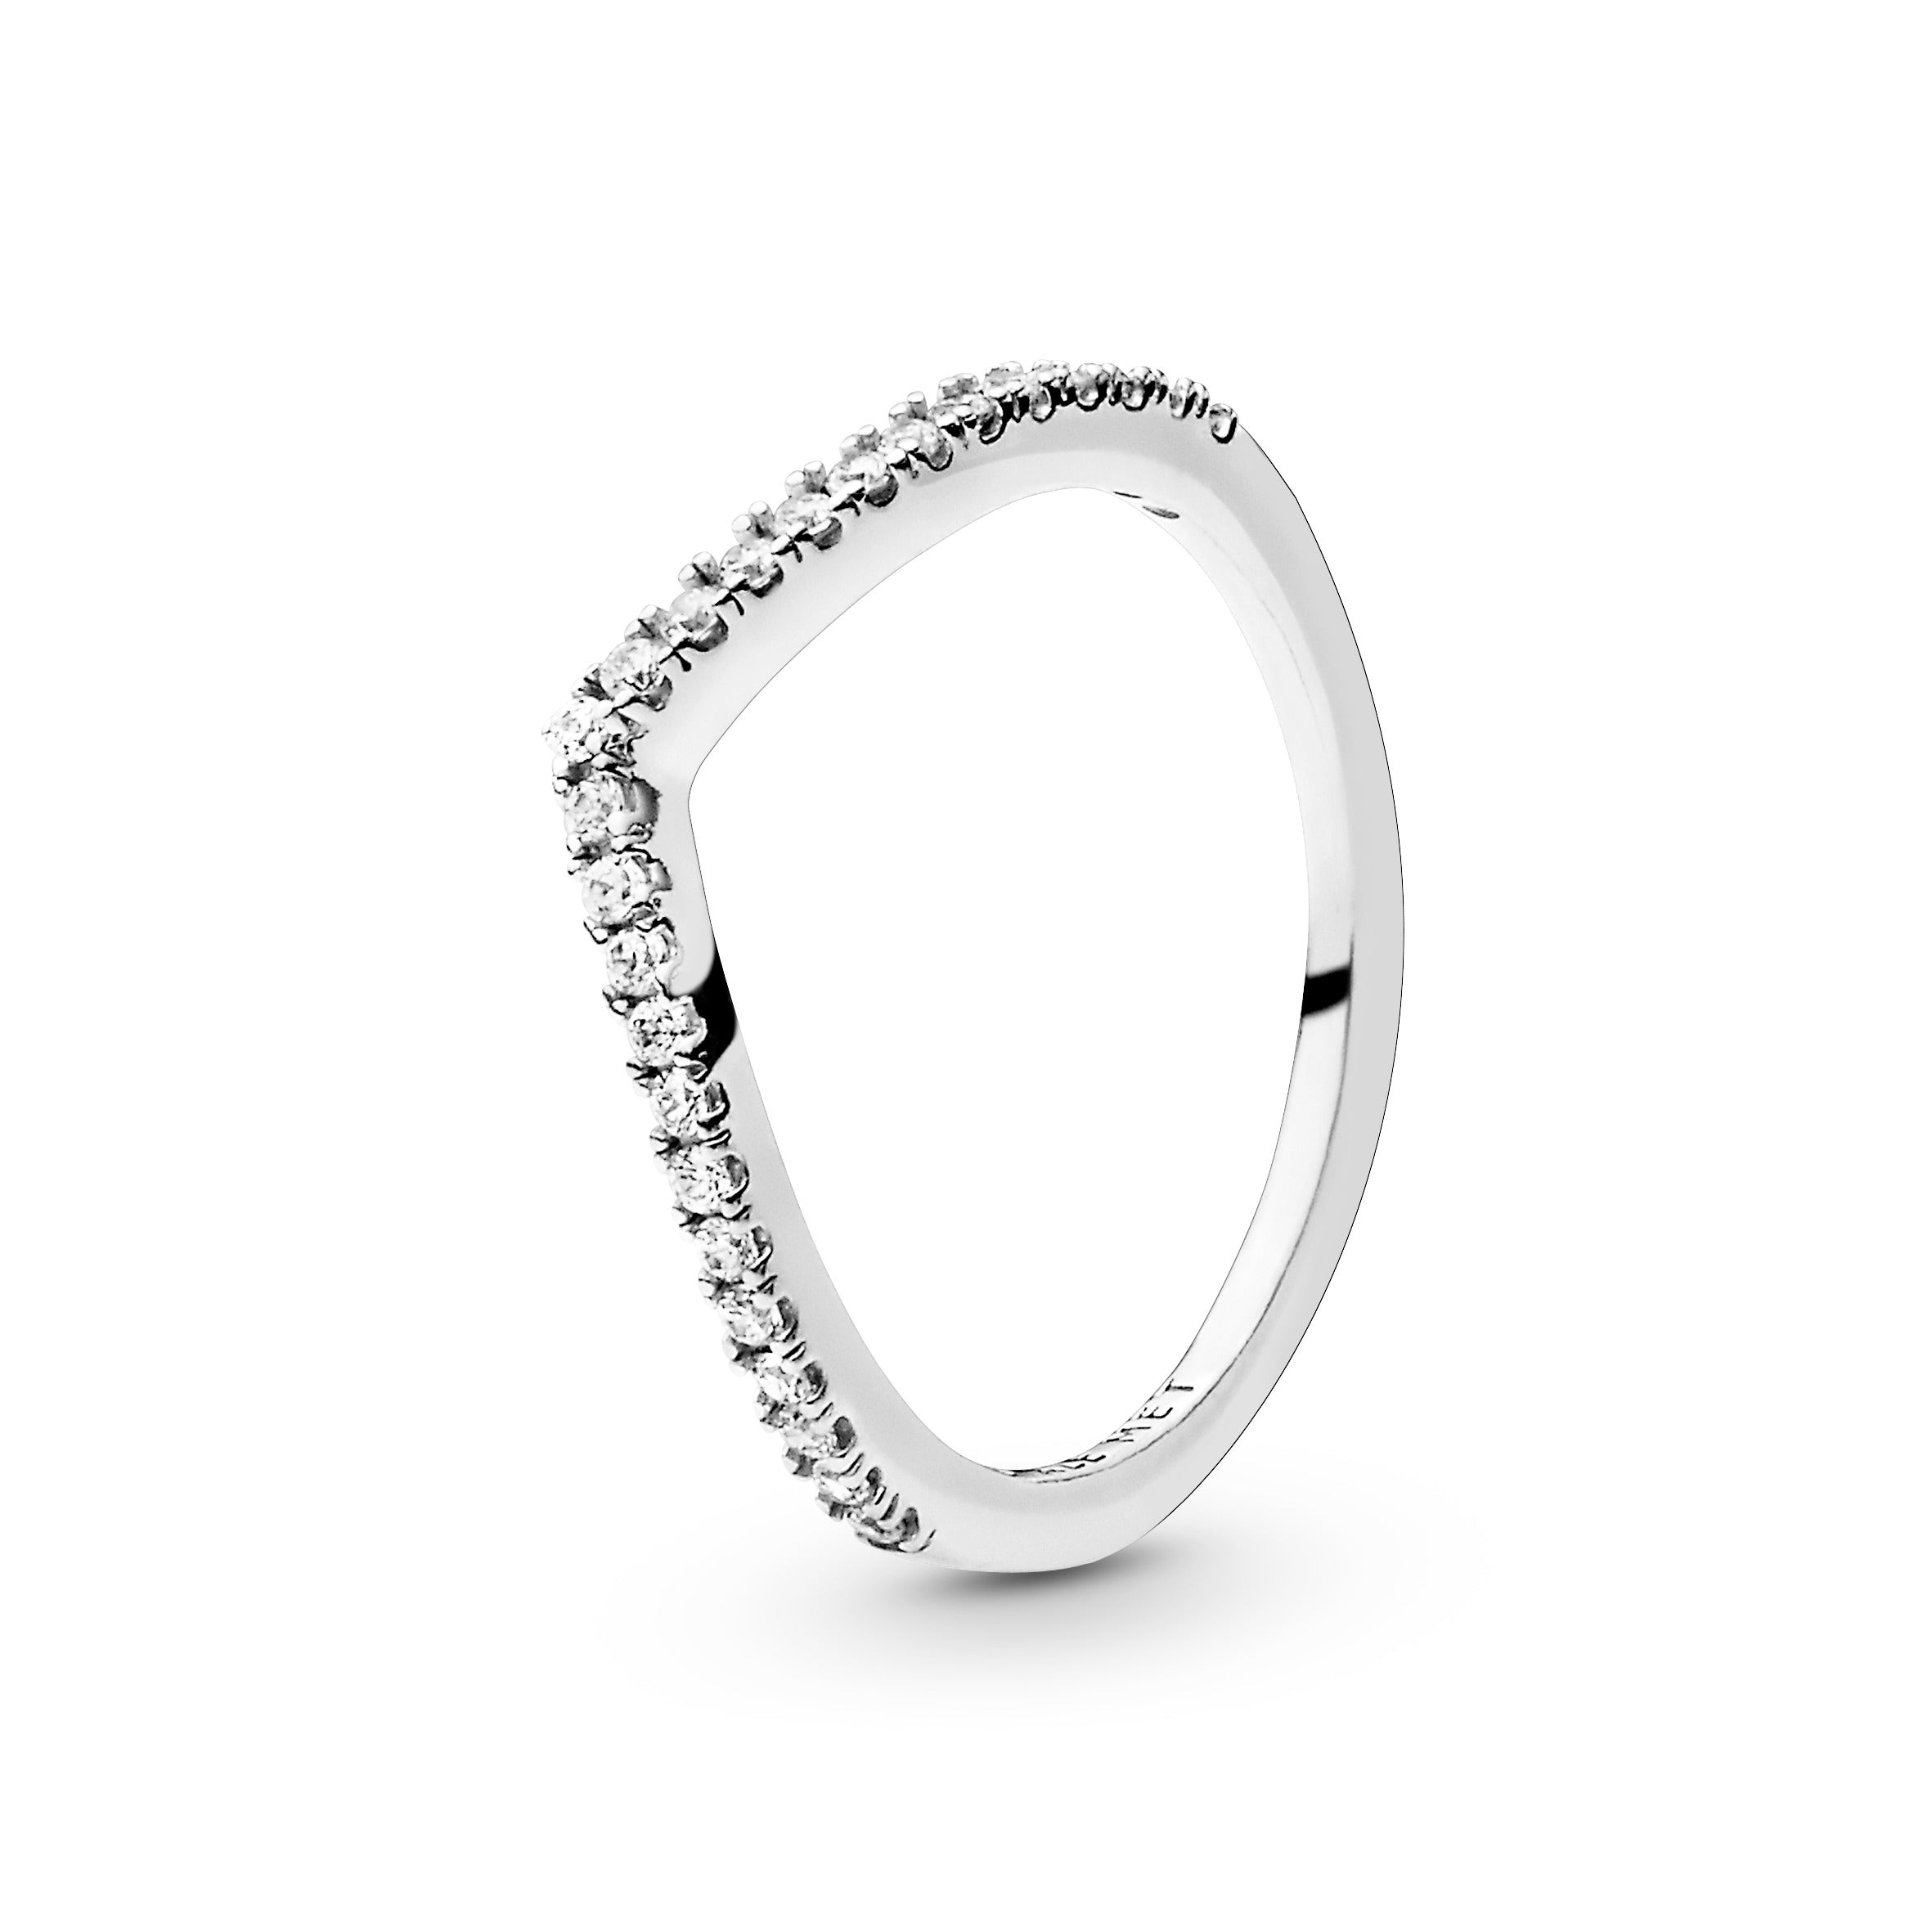 Wishbone silver ring with clear cubic zirconia